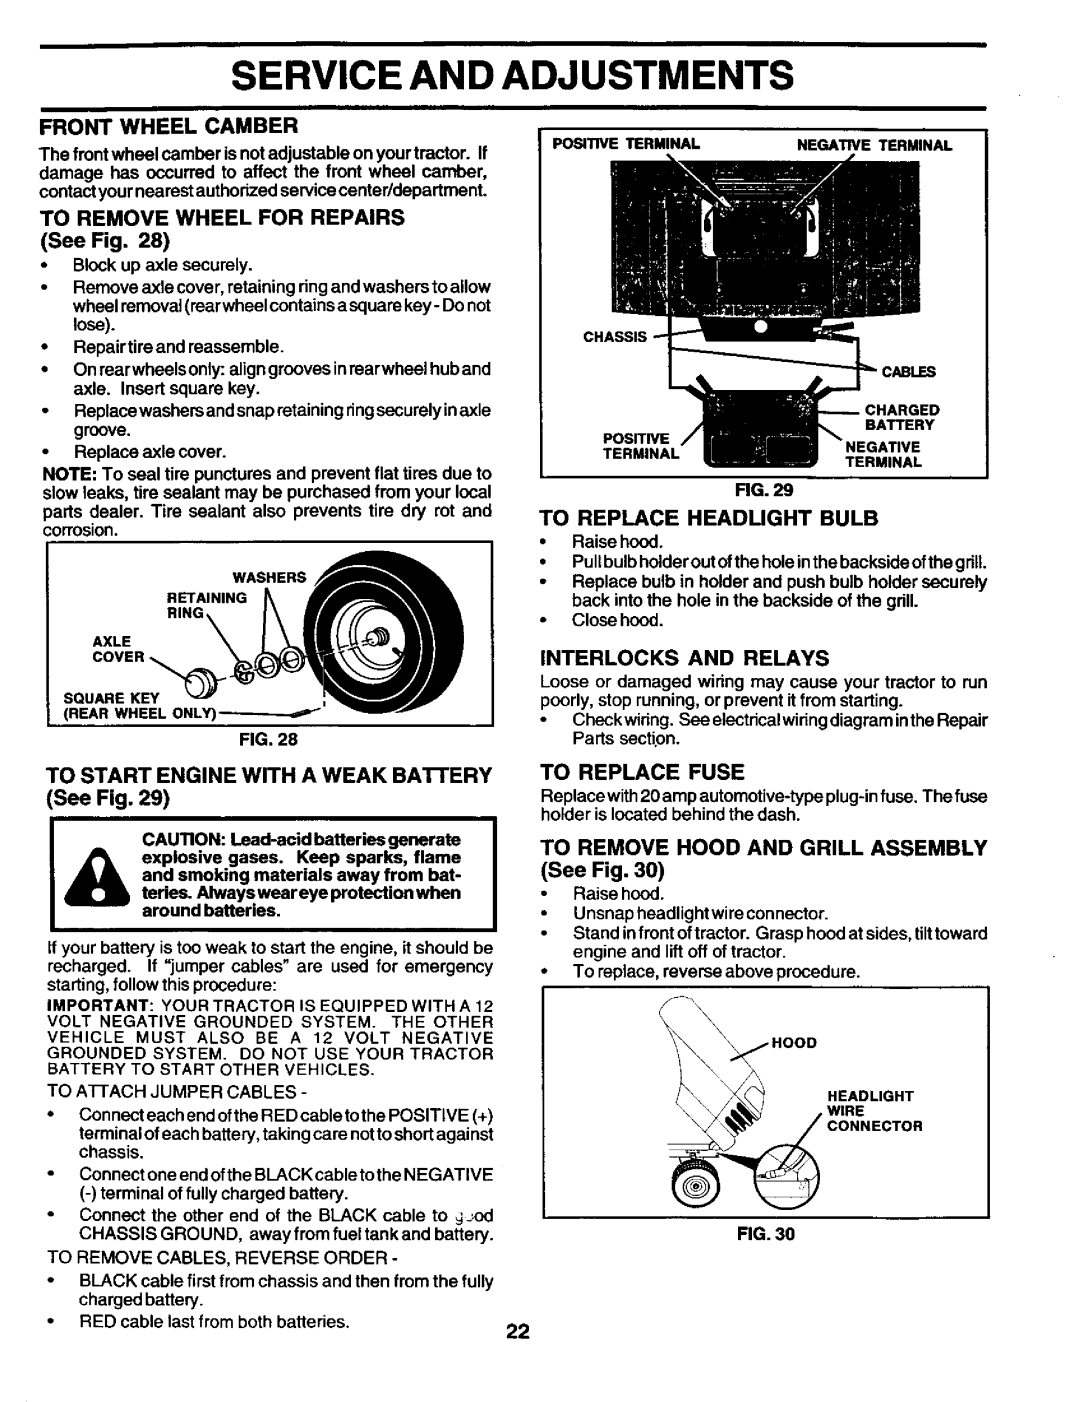 Craftsman 944.602951 owner manual cov.WASRERSj, Service And Adjustments, TO START ENGINE WITH A WEAK BATrERY See Fig 